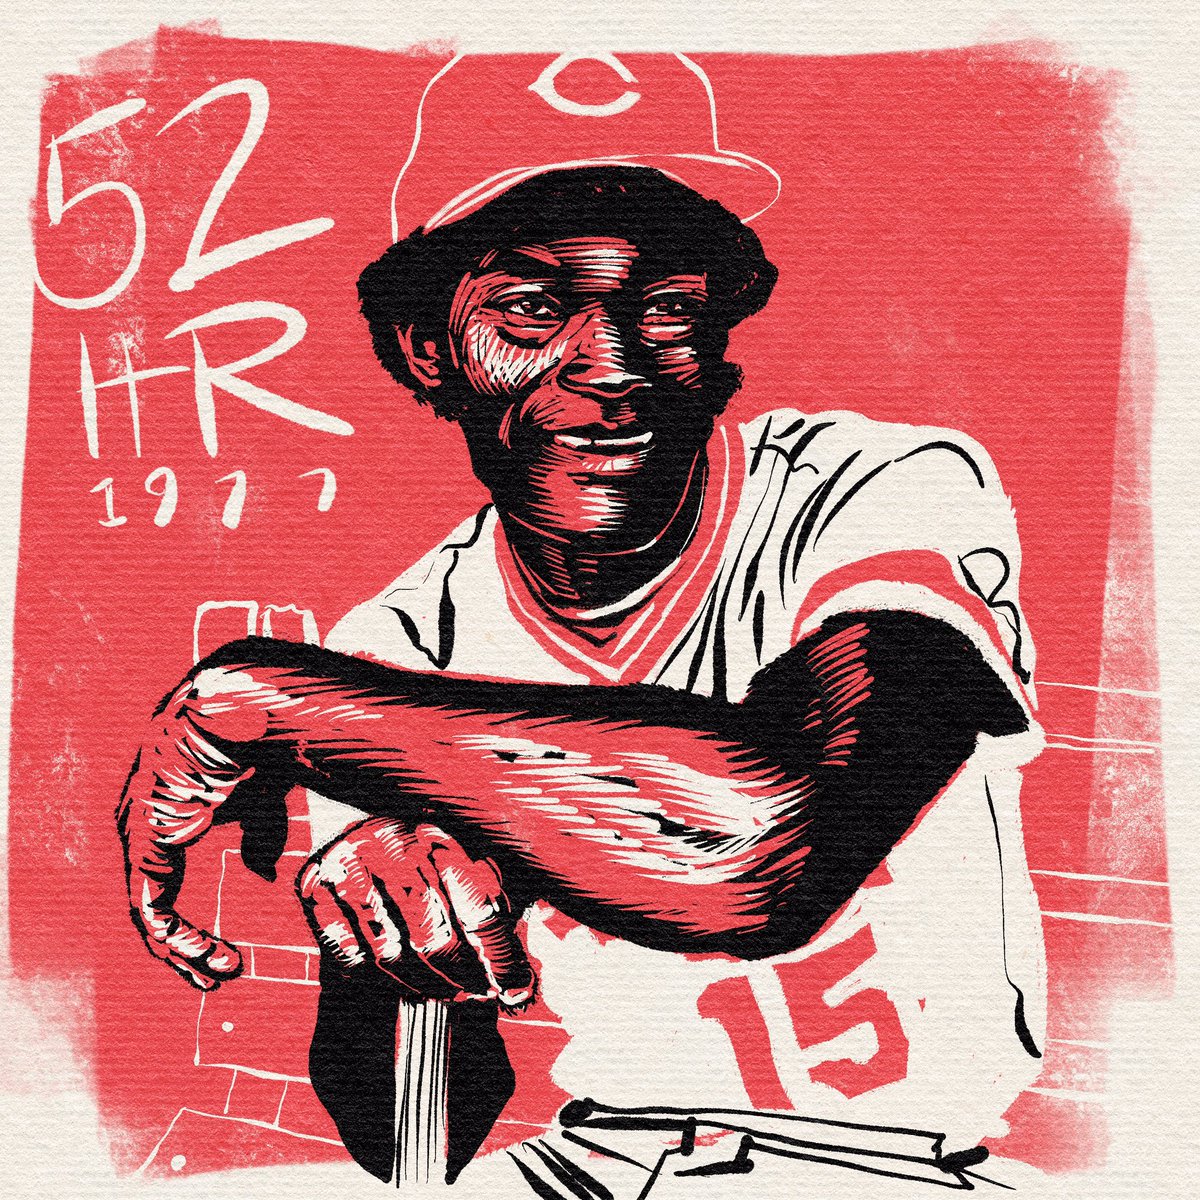 This Day in Baseball History: April 25, 1977 - George Foster has seven RBI, five runs, two home runs, a double and a single in the Reds’ 23 - 9 victory over the host Atlanta Braves. Cincy ties an NL record by scoring 12 runs in the 5th. #tripleplaydesign #georgefoster